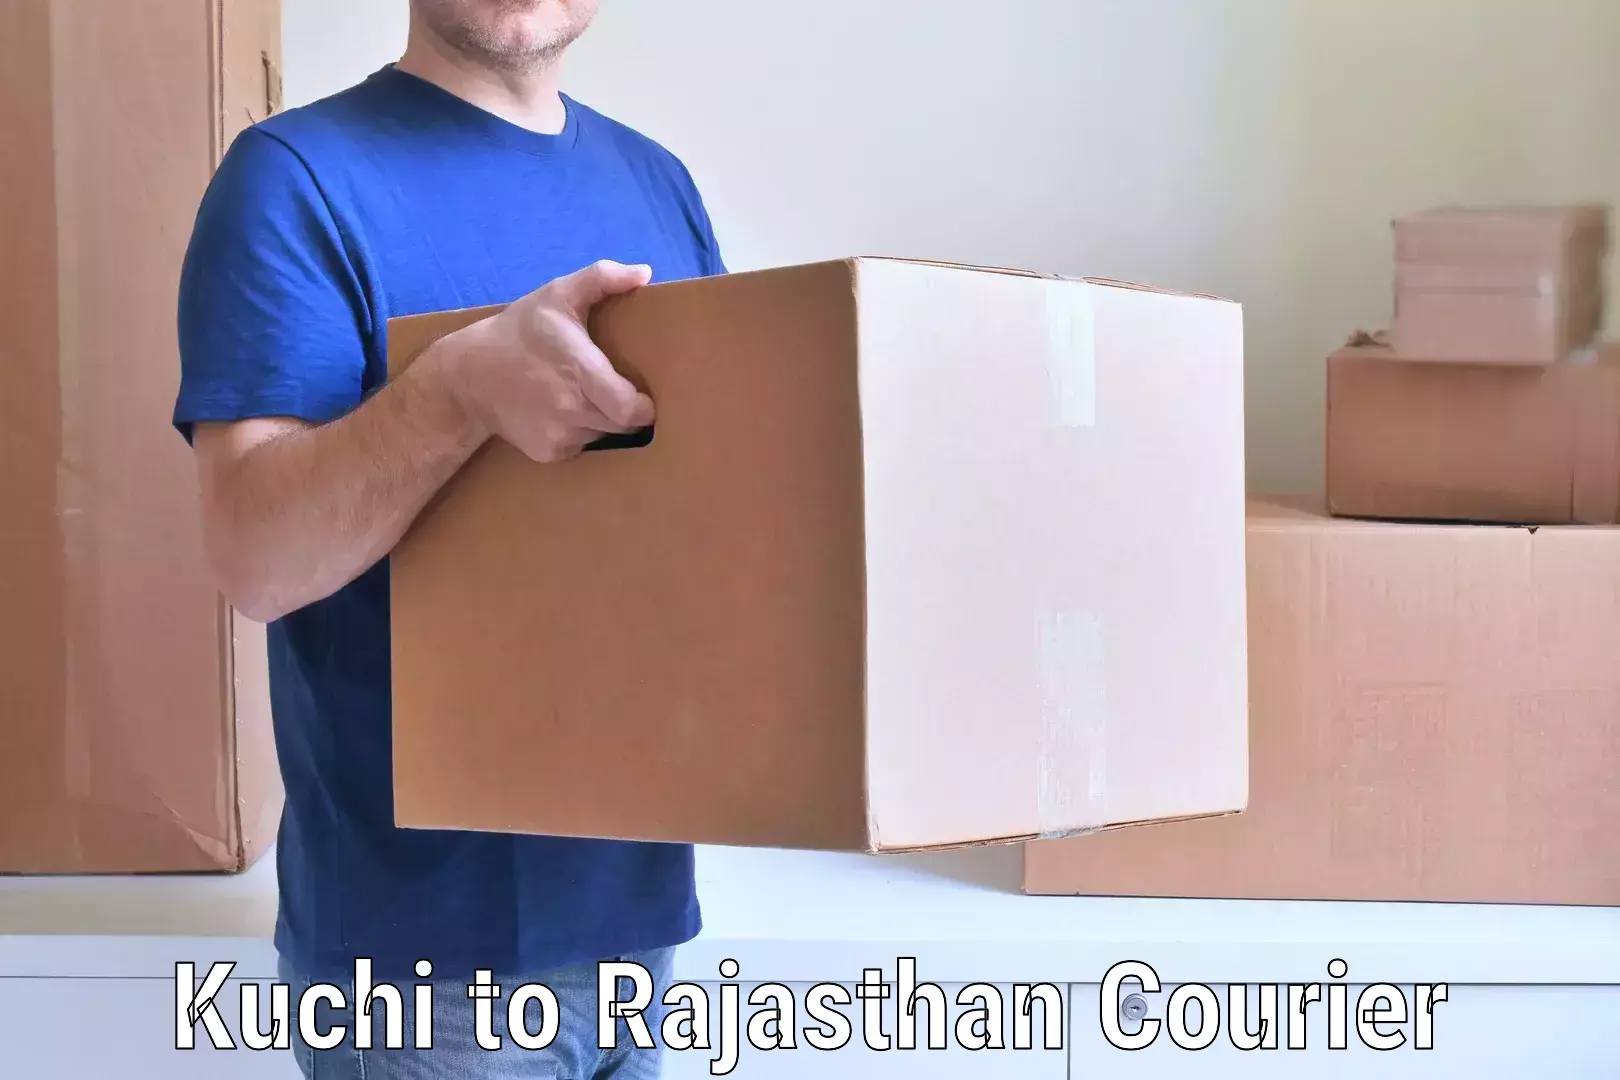 Professional movers and packers in Kuchi to Dungarpur